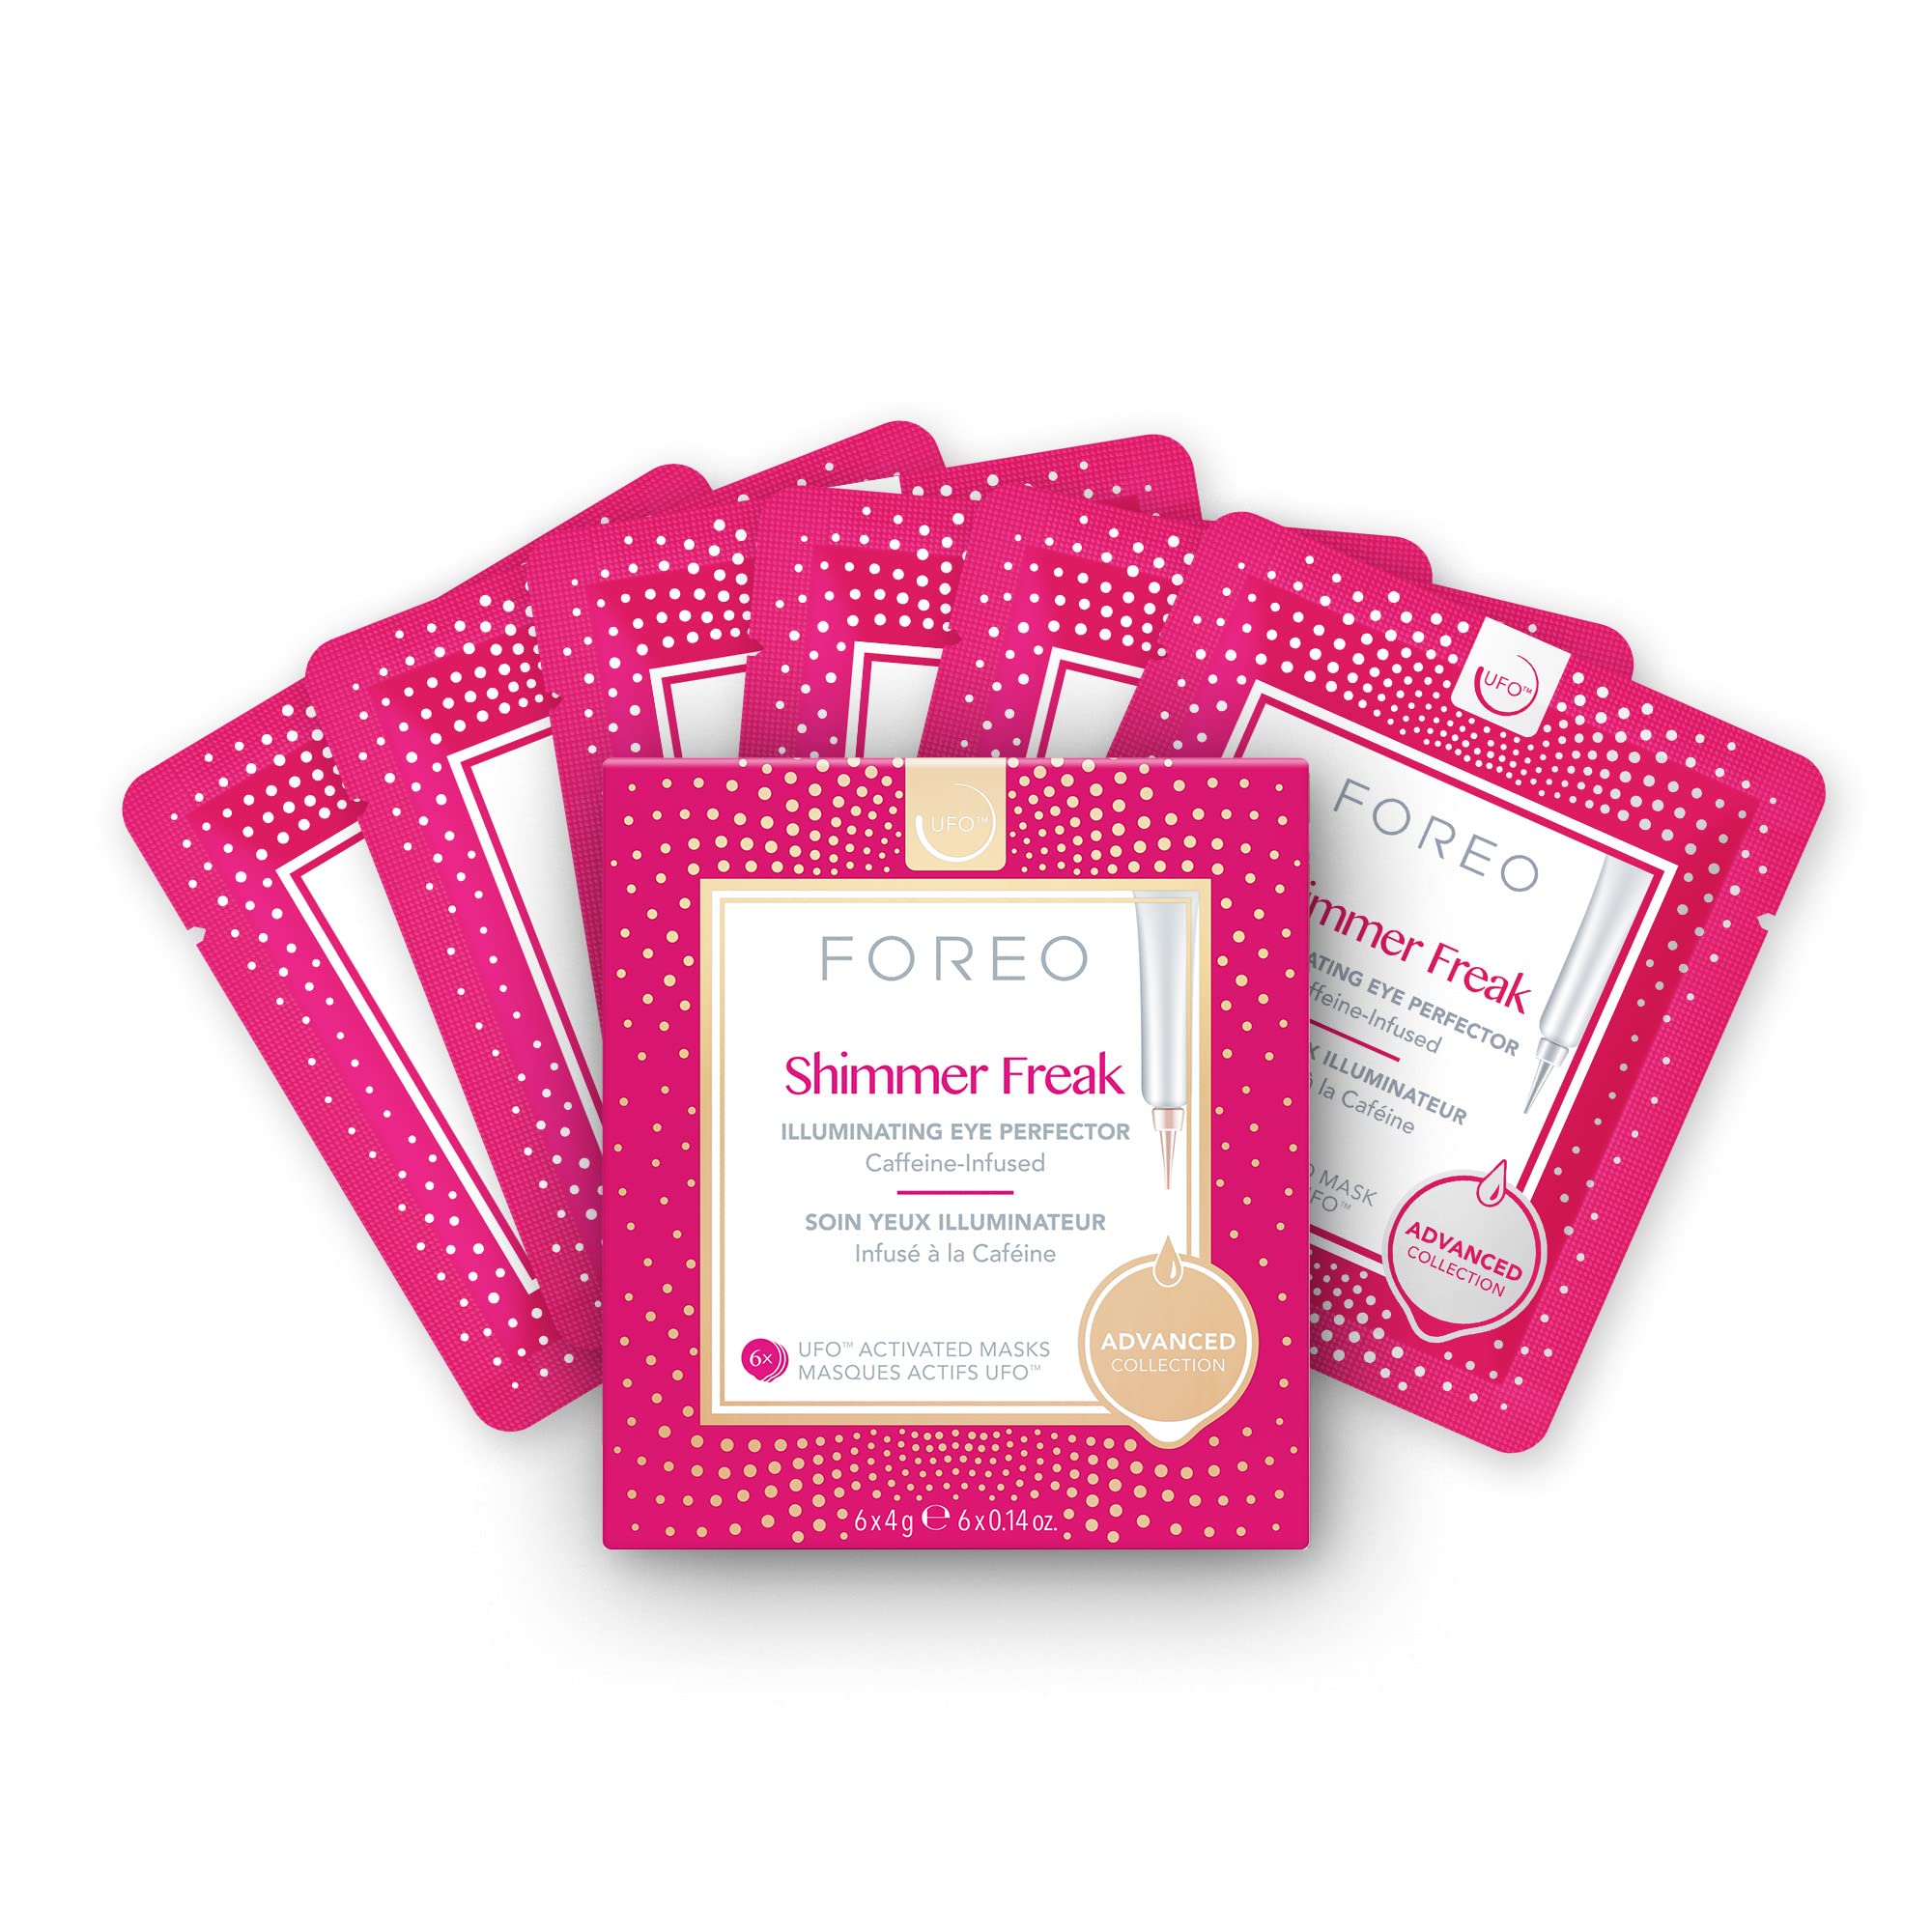 FOREO Shimmer Freak Facial Skin Illuminating Mask Eye in Wrinkles Puffiness - - pcs Rose - 6 Water - - UFO-Activated Contour All - Types Niacinamide Pack 